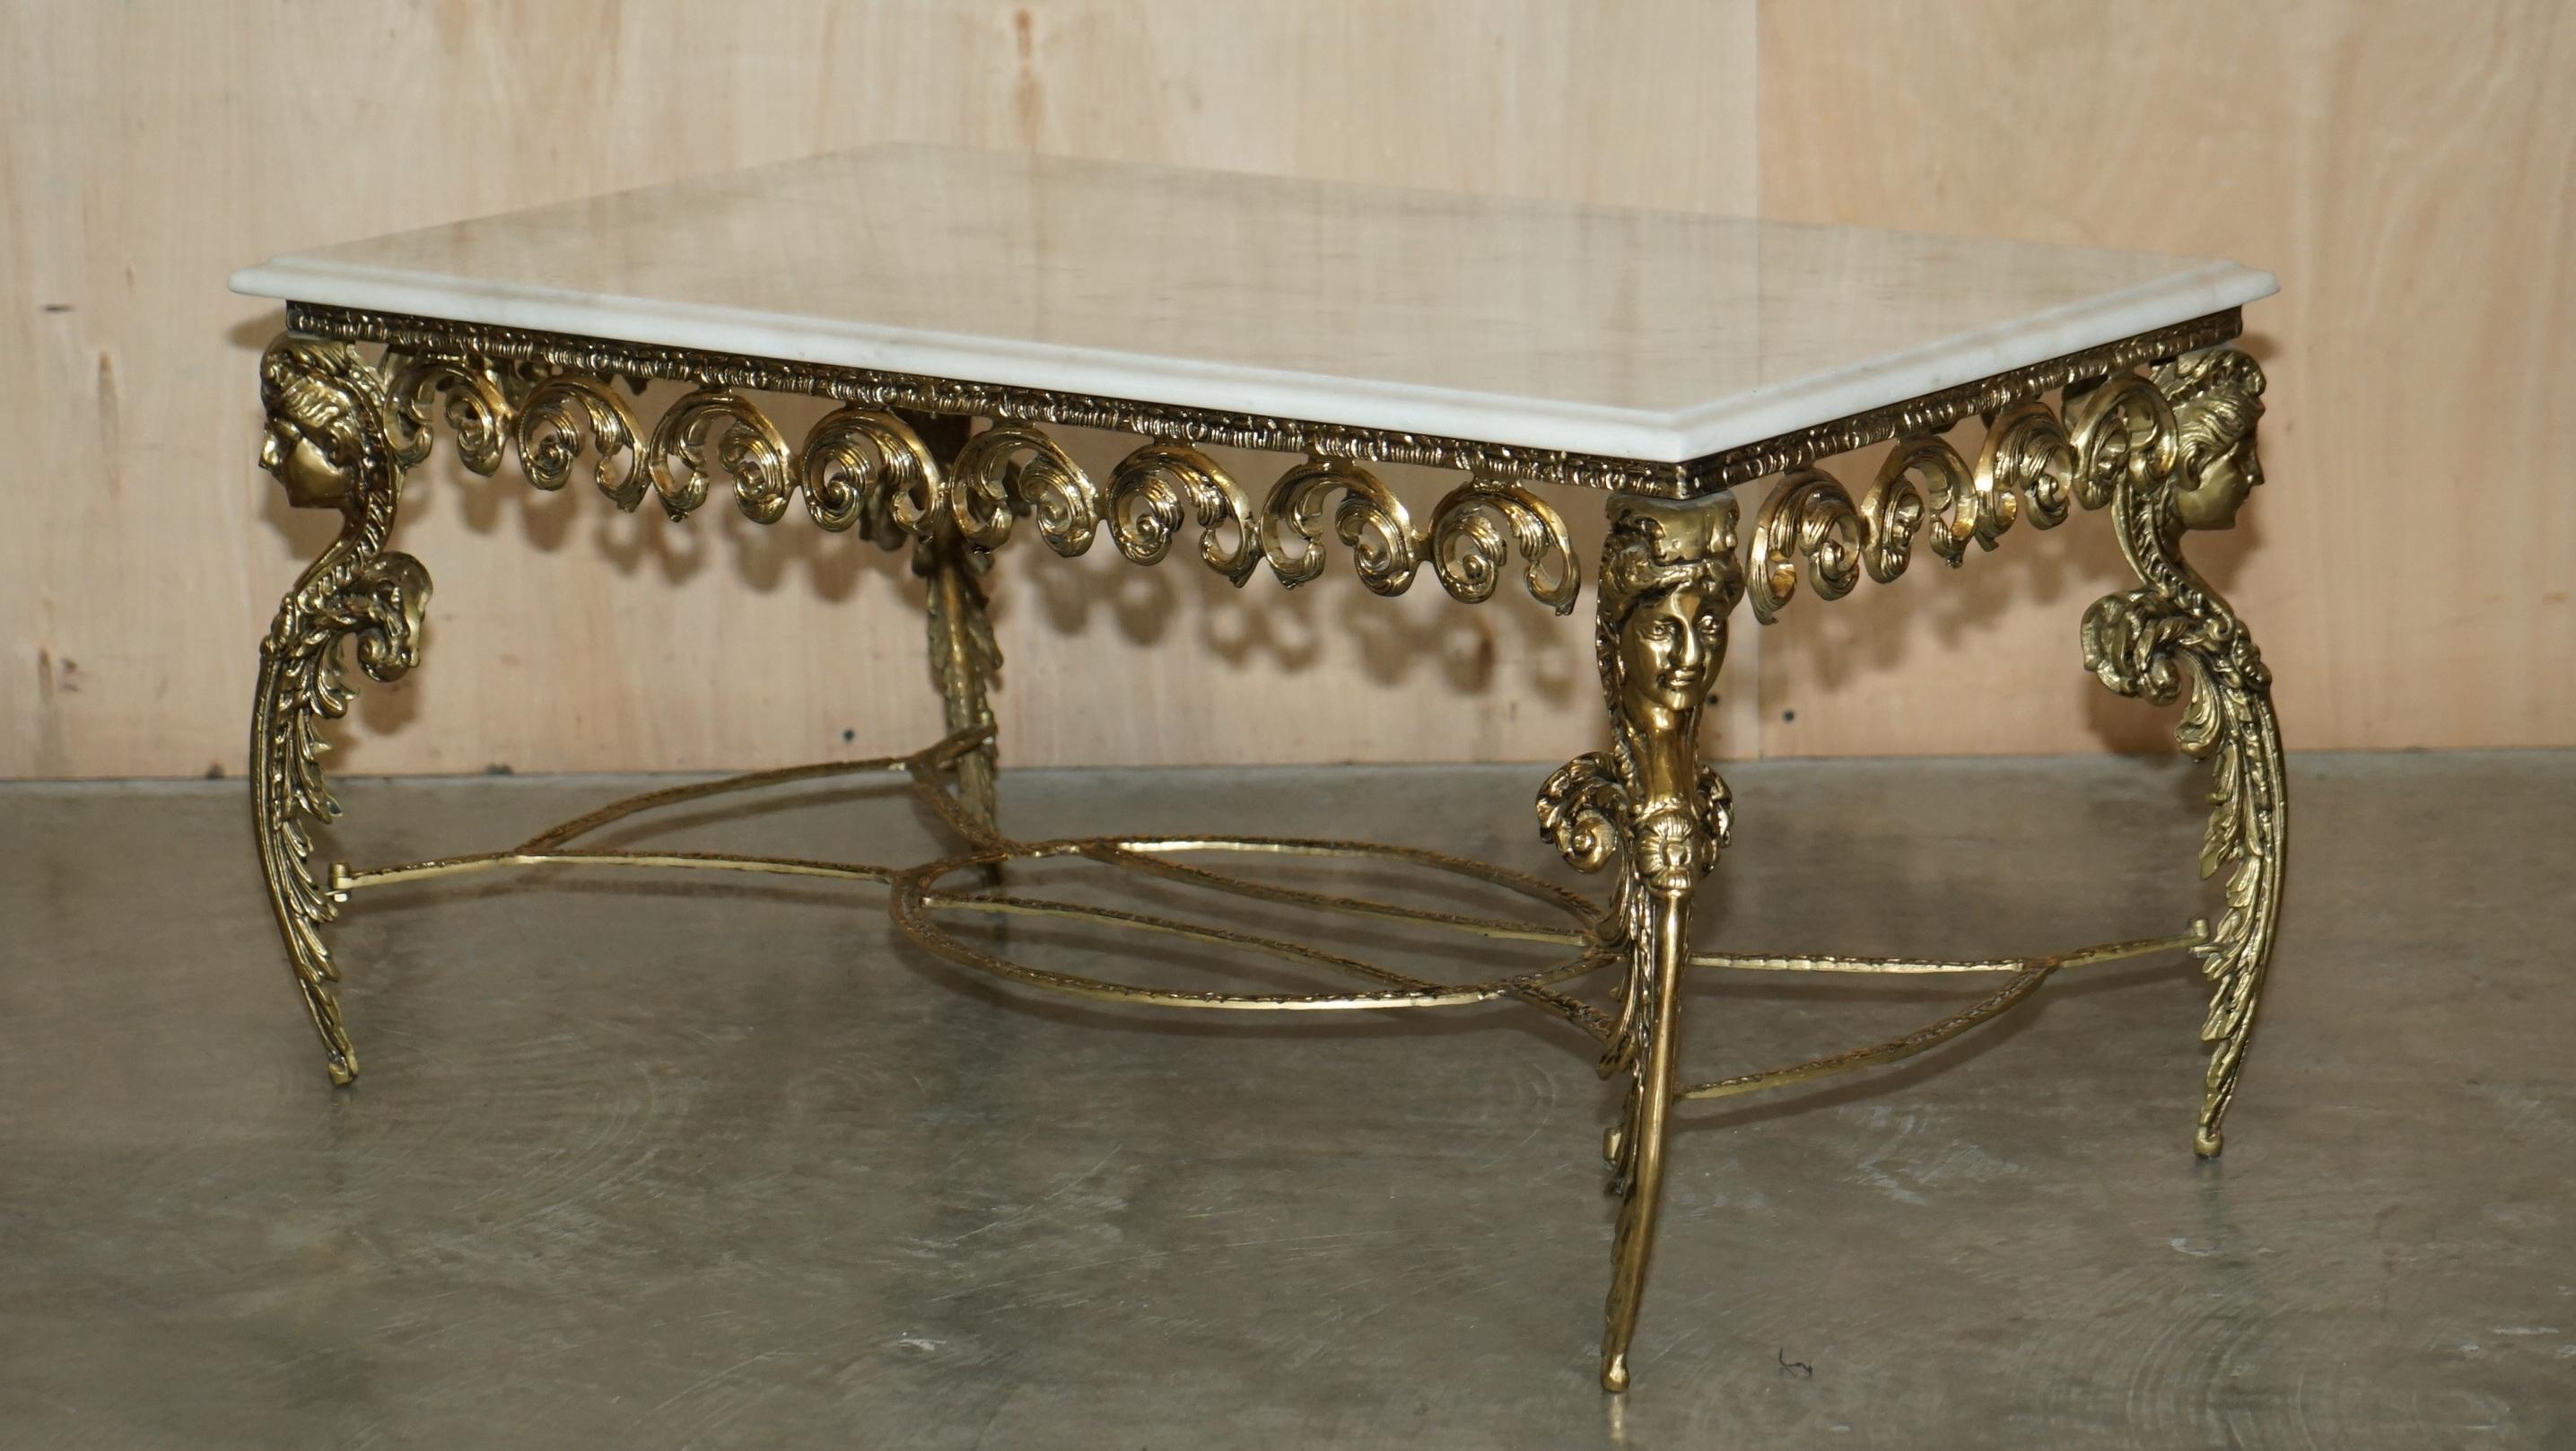 We are delighted to offer for sale this lovely hand made in Italy brass framed coffee table with thick Carrara marble top.

A very well made and good looking table. The marble top is extremely thick and beautifully veined, it sits on a very ornate